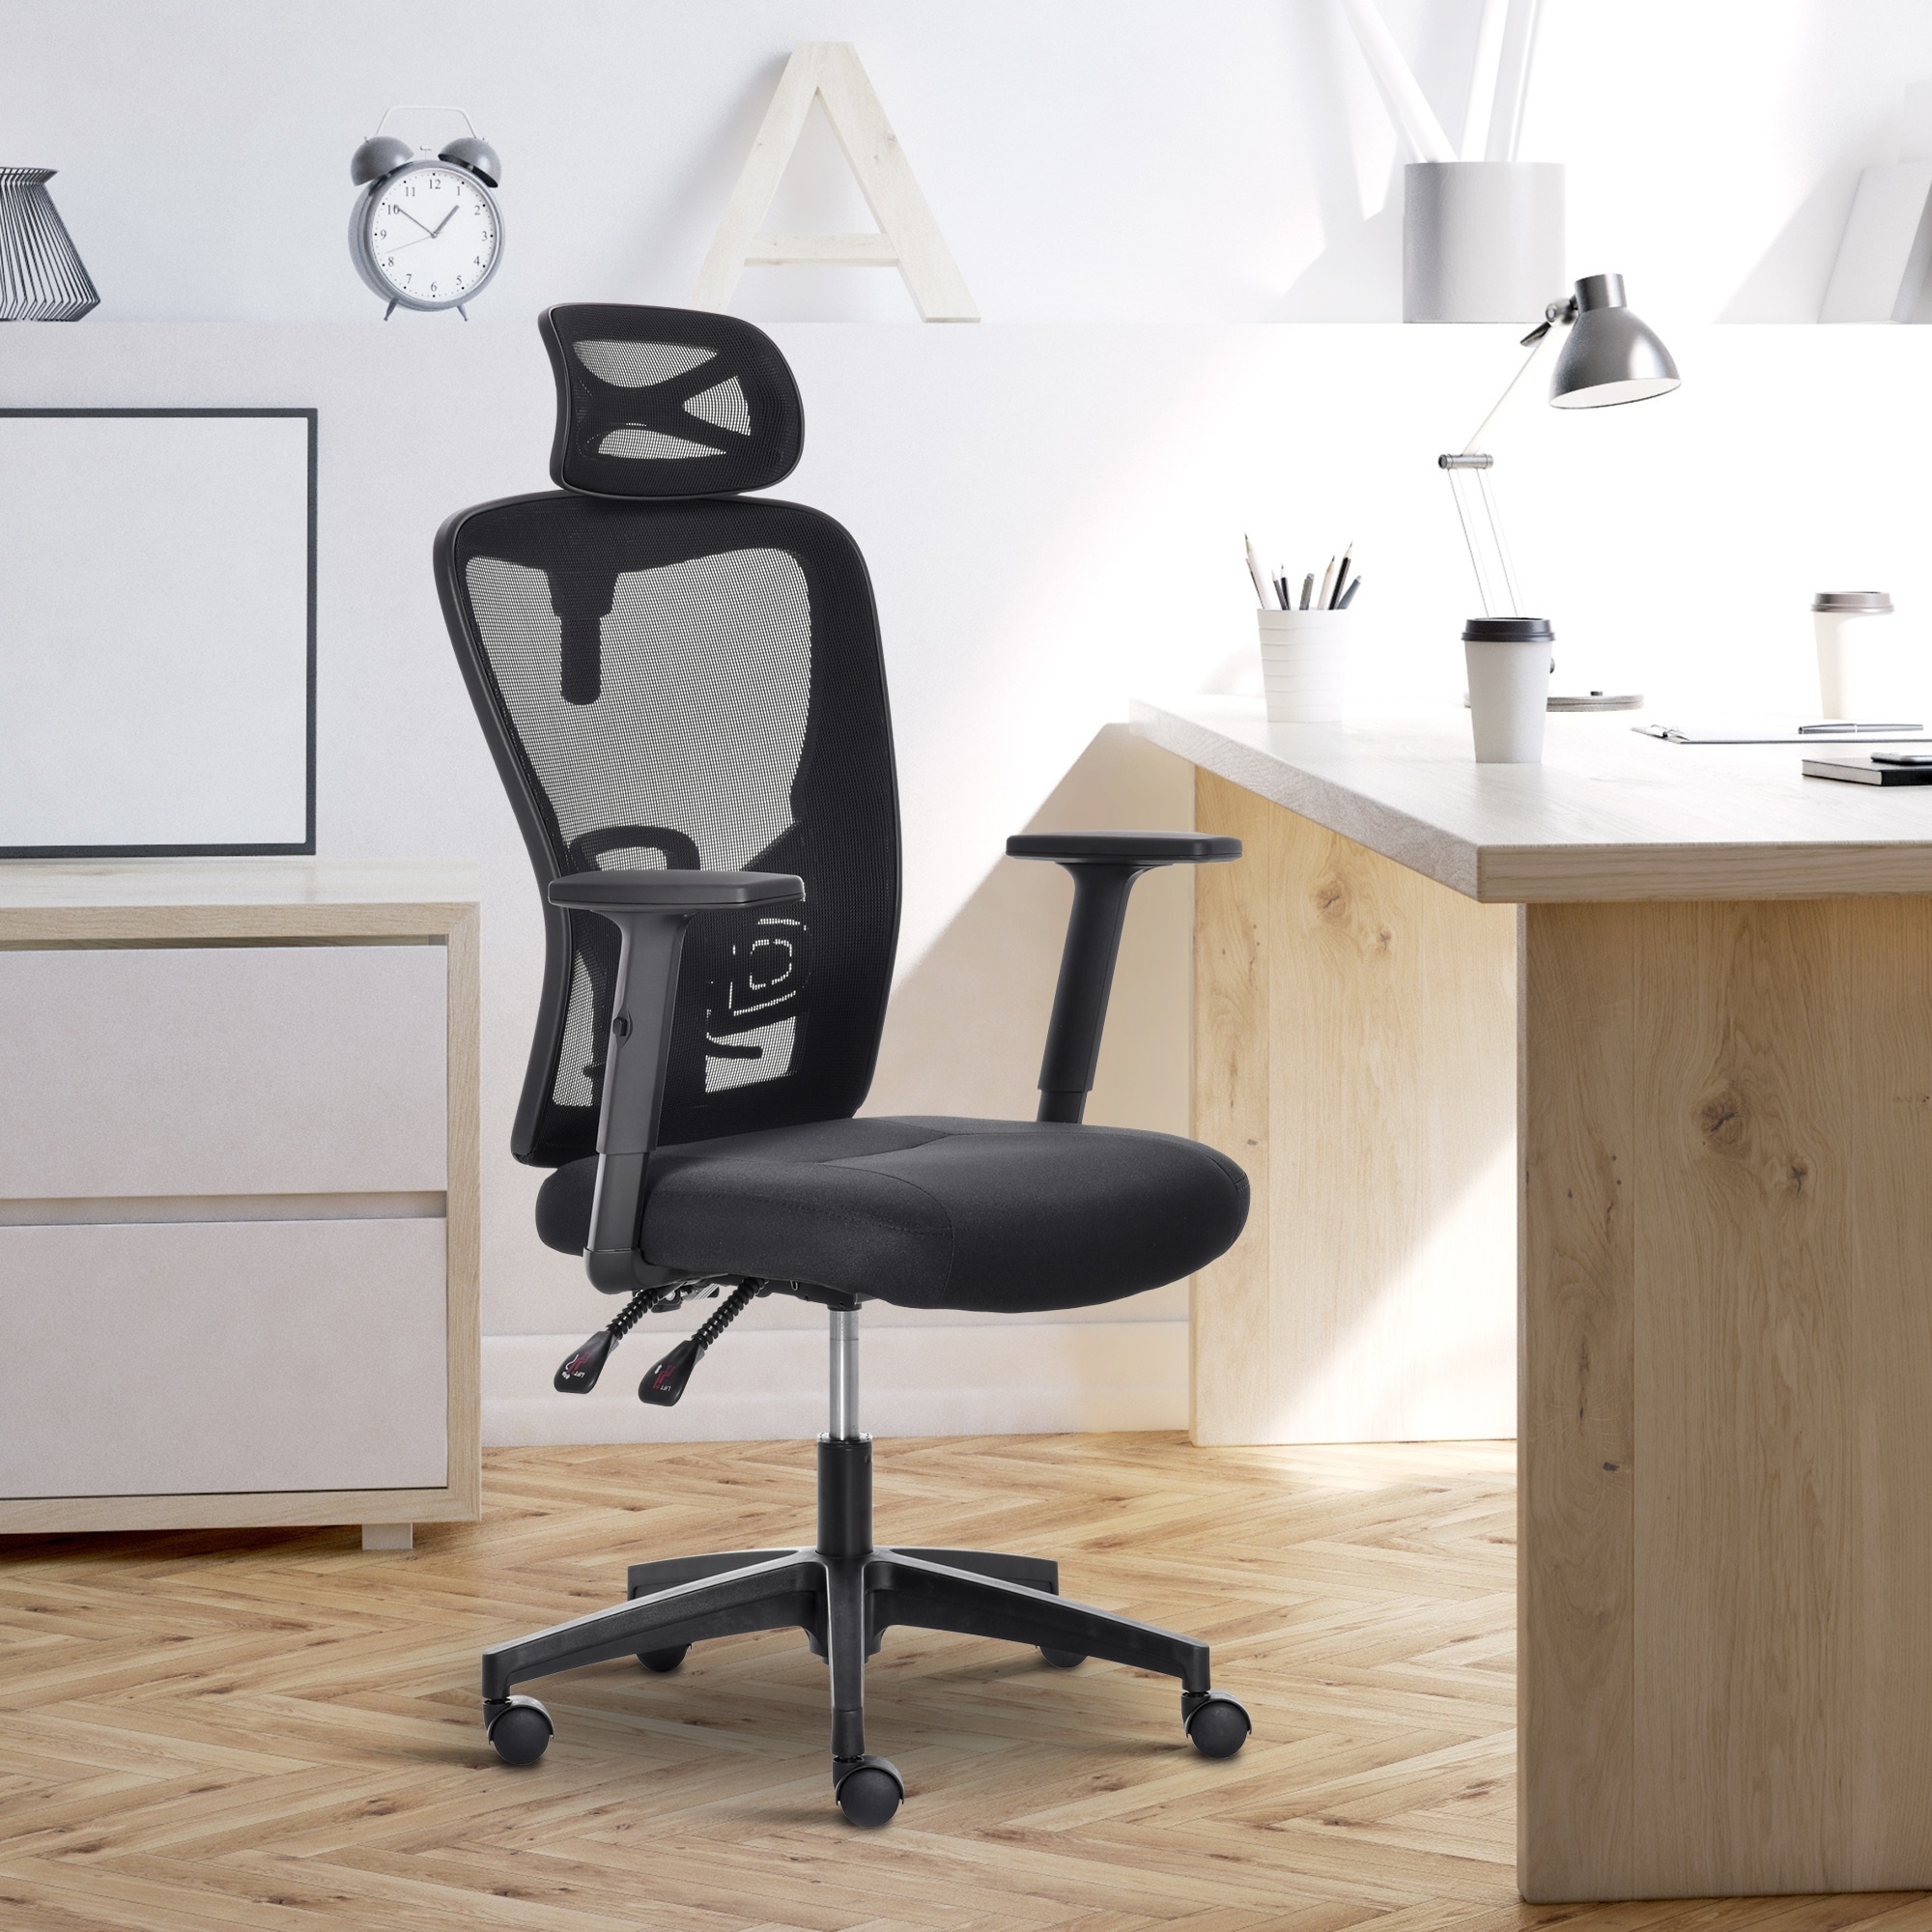 https://ak1.ostkcdn.com/images/products/is/images/direct/4606107be51f7cbf87580d4a411cf7ed0a769c84/Vinsetto-Mesh-Home-Office-Chair-High-Back-Ergonomic-Computer-Task-Chair-with-Lumbar-Back-Support%2C-Rotate-Headrest%2C-Adjustable.jpg